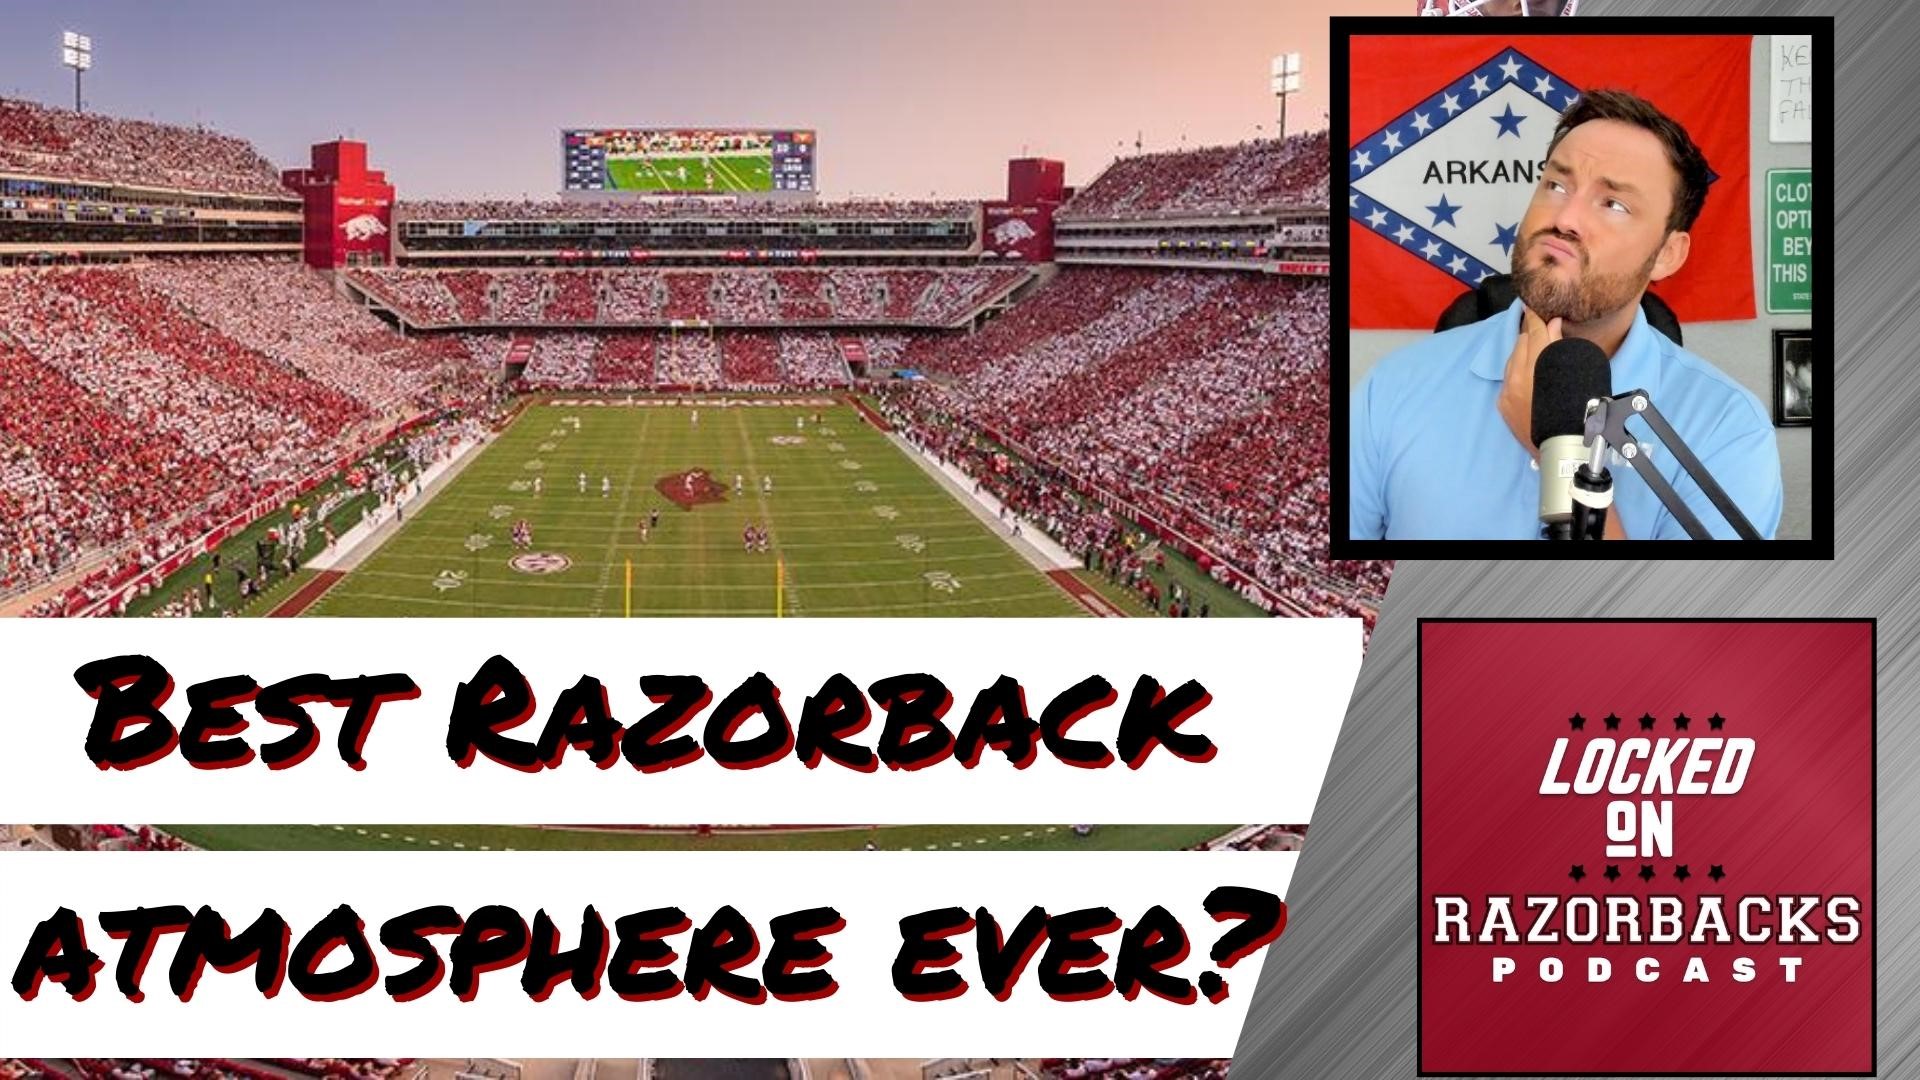 John Nabors discusses the possibility of this weekend's game against the Crimson Tide being the biggest & best Razorback crowd ever in history.